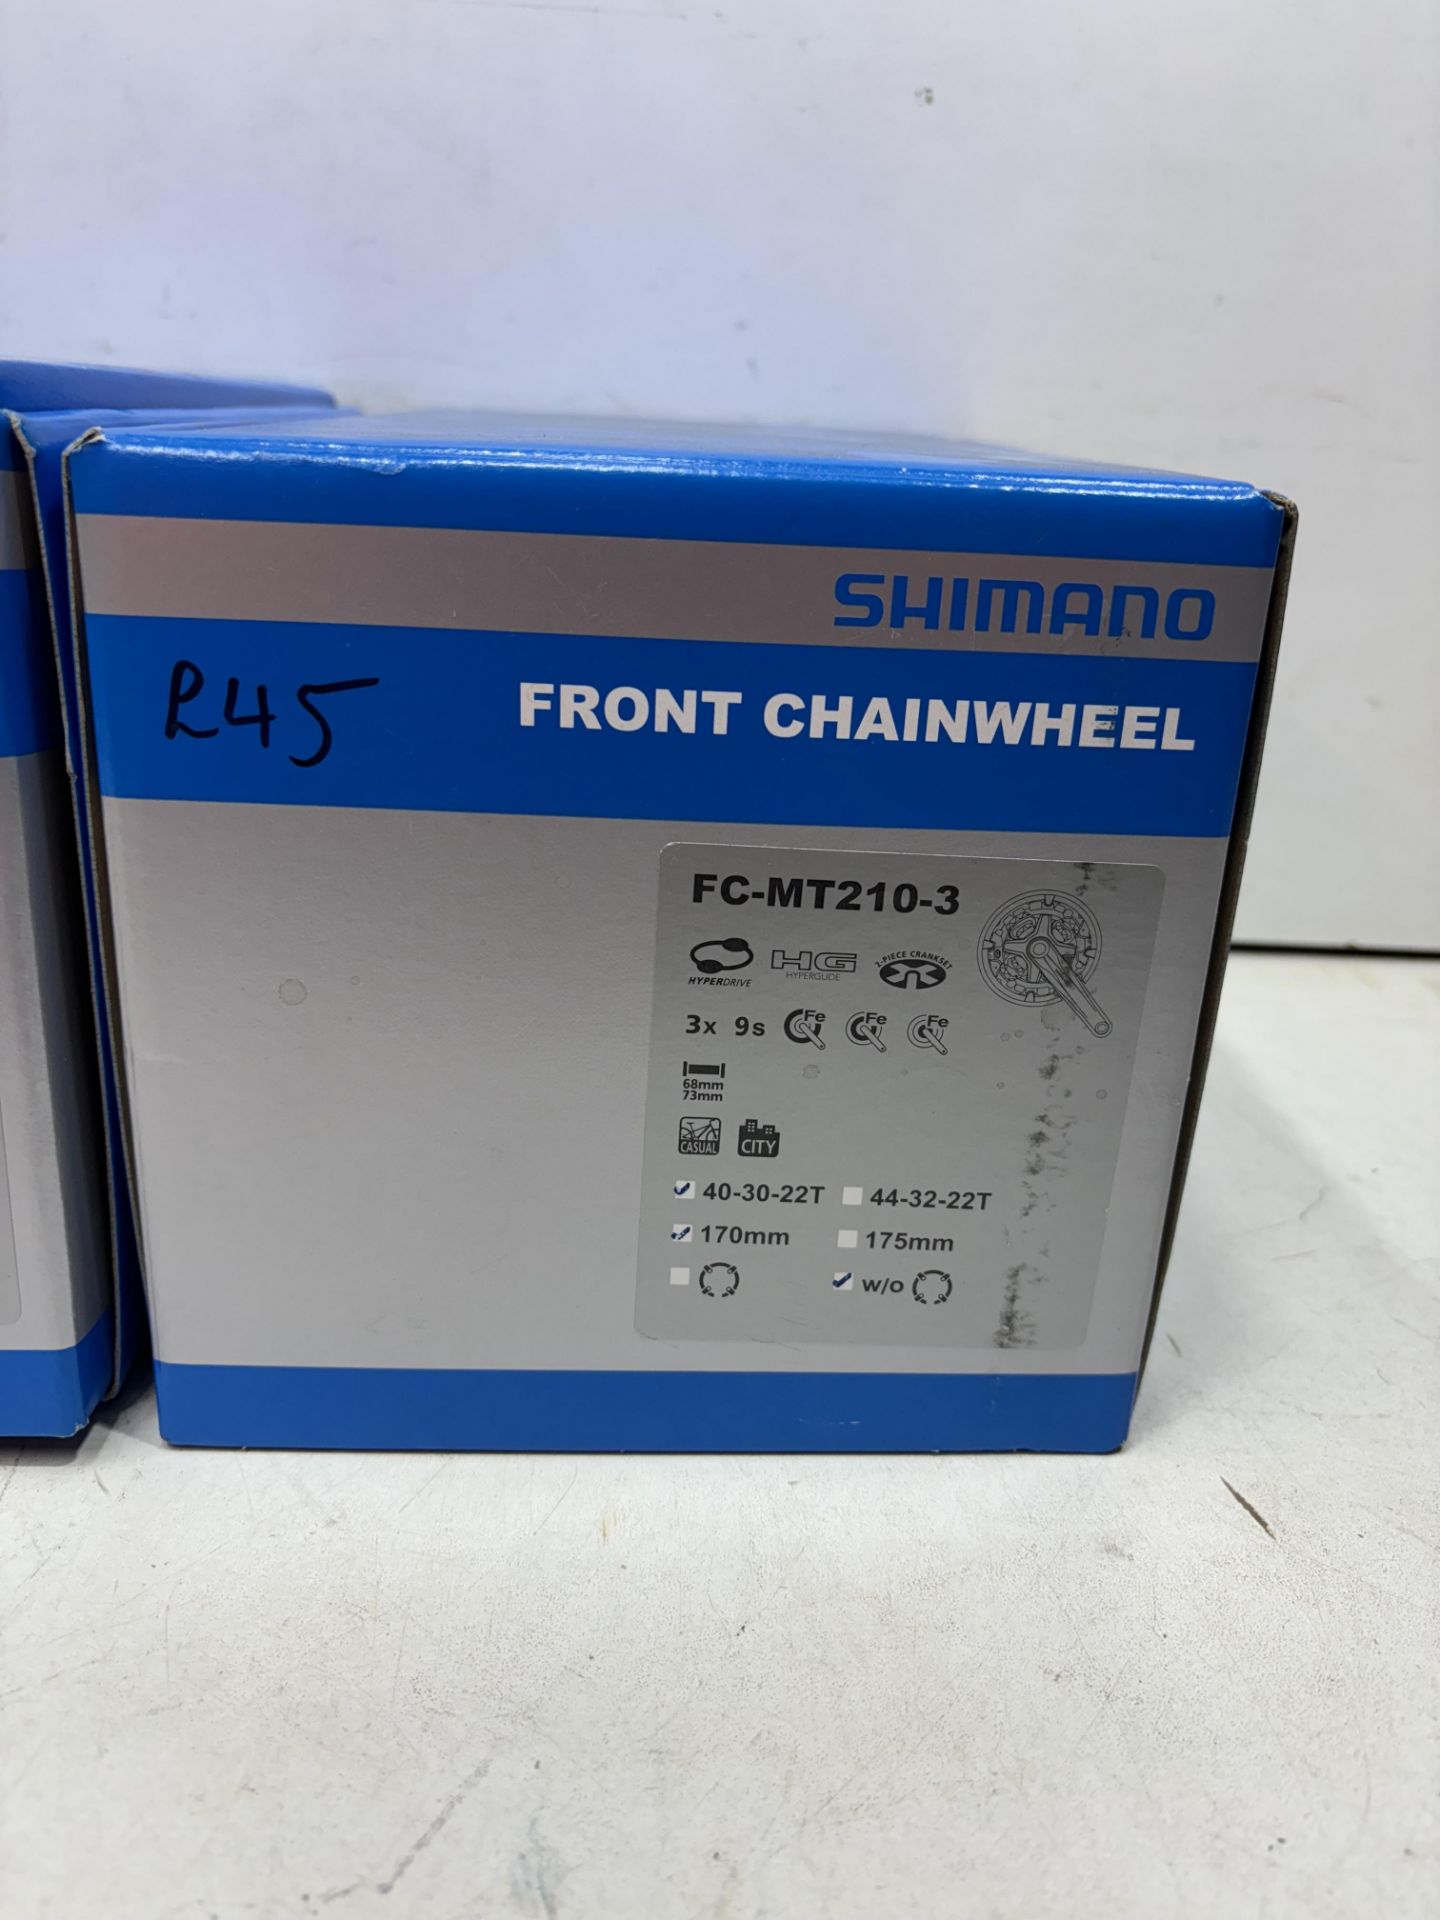 2 x Shimano FC-MT210 2-piece chainsets 9-speed, black w/o chainguard - Image 3 of 3